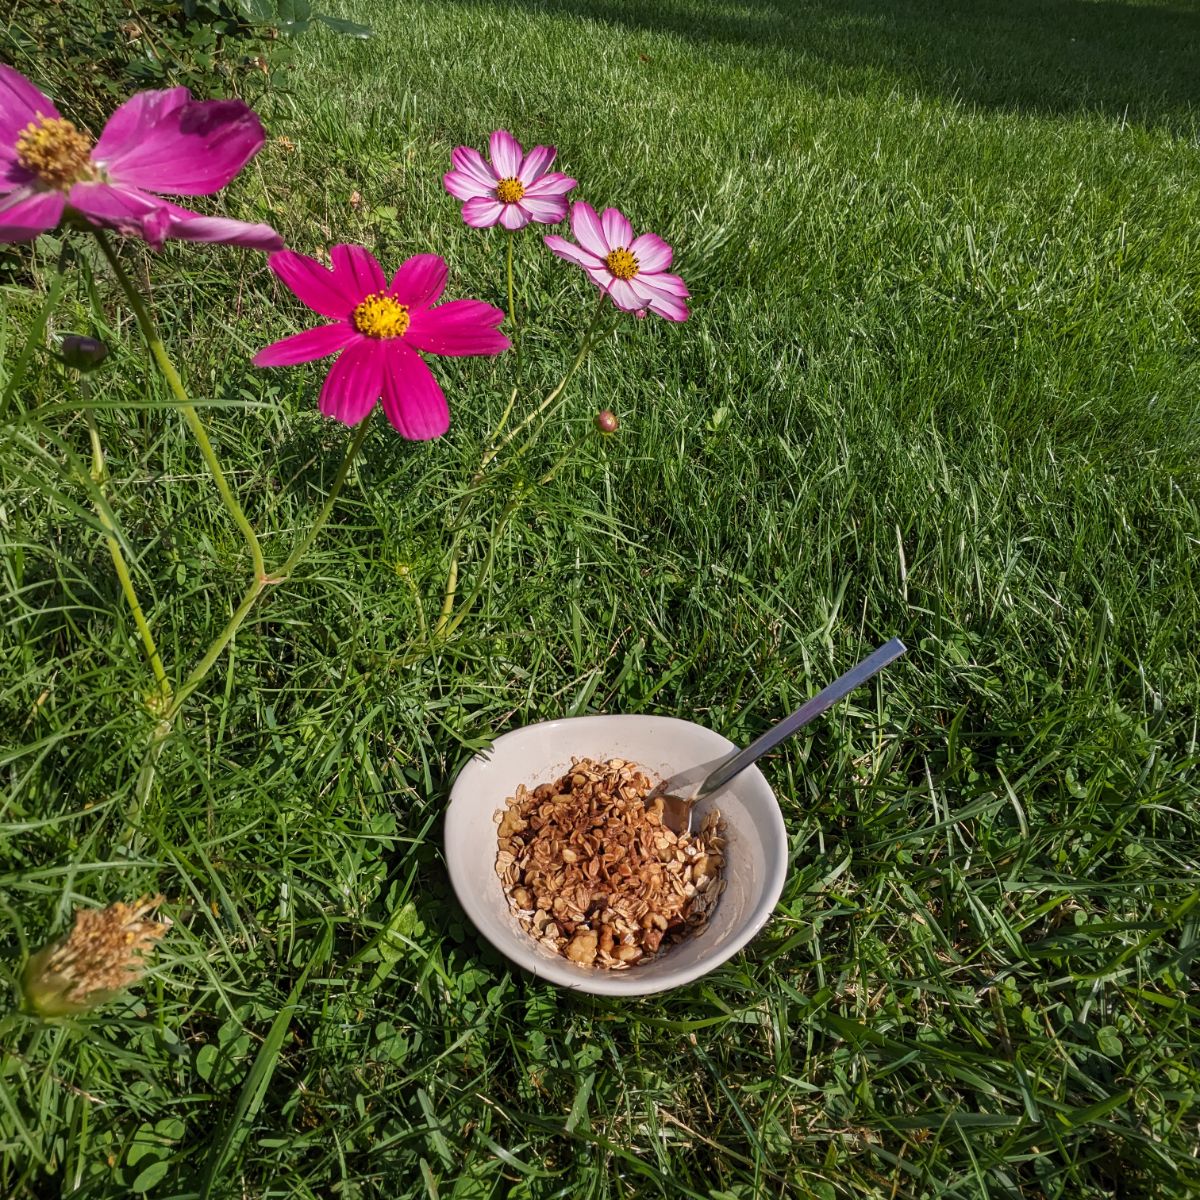 Bowl of oatmeal with a spoon in the garden with purple and white cosmos flowers